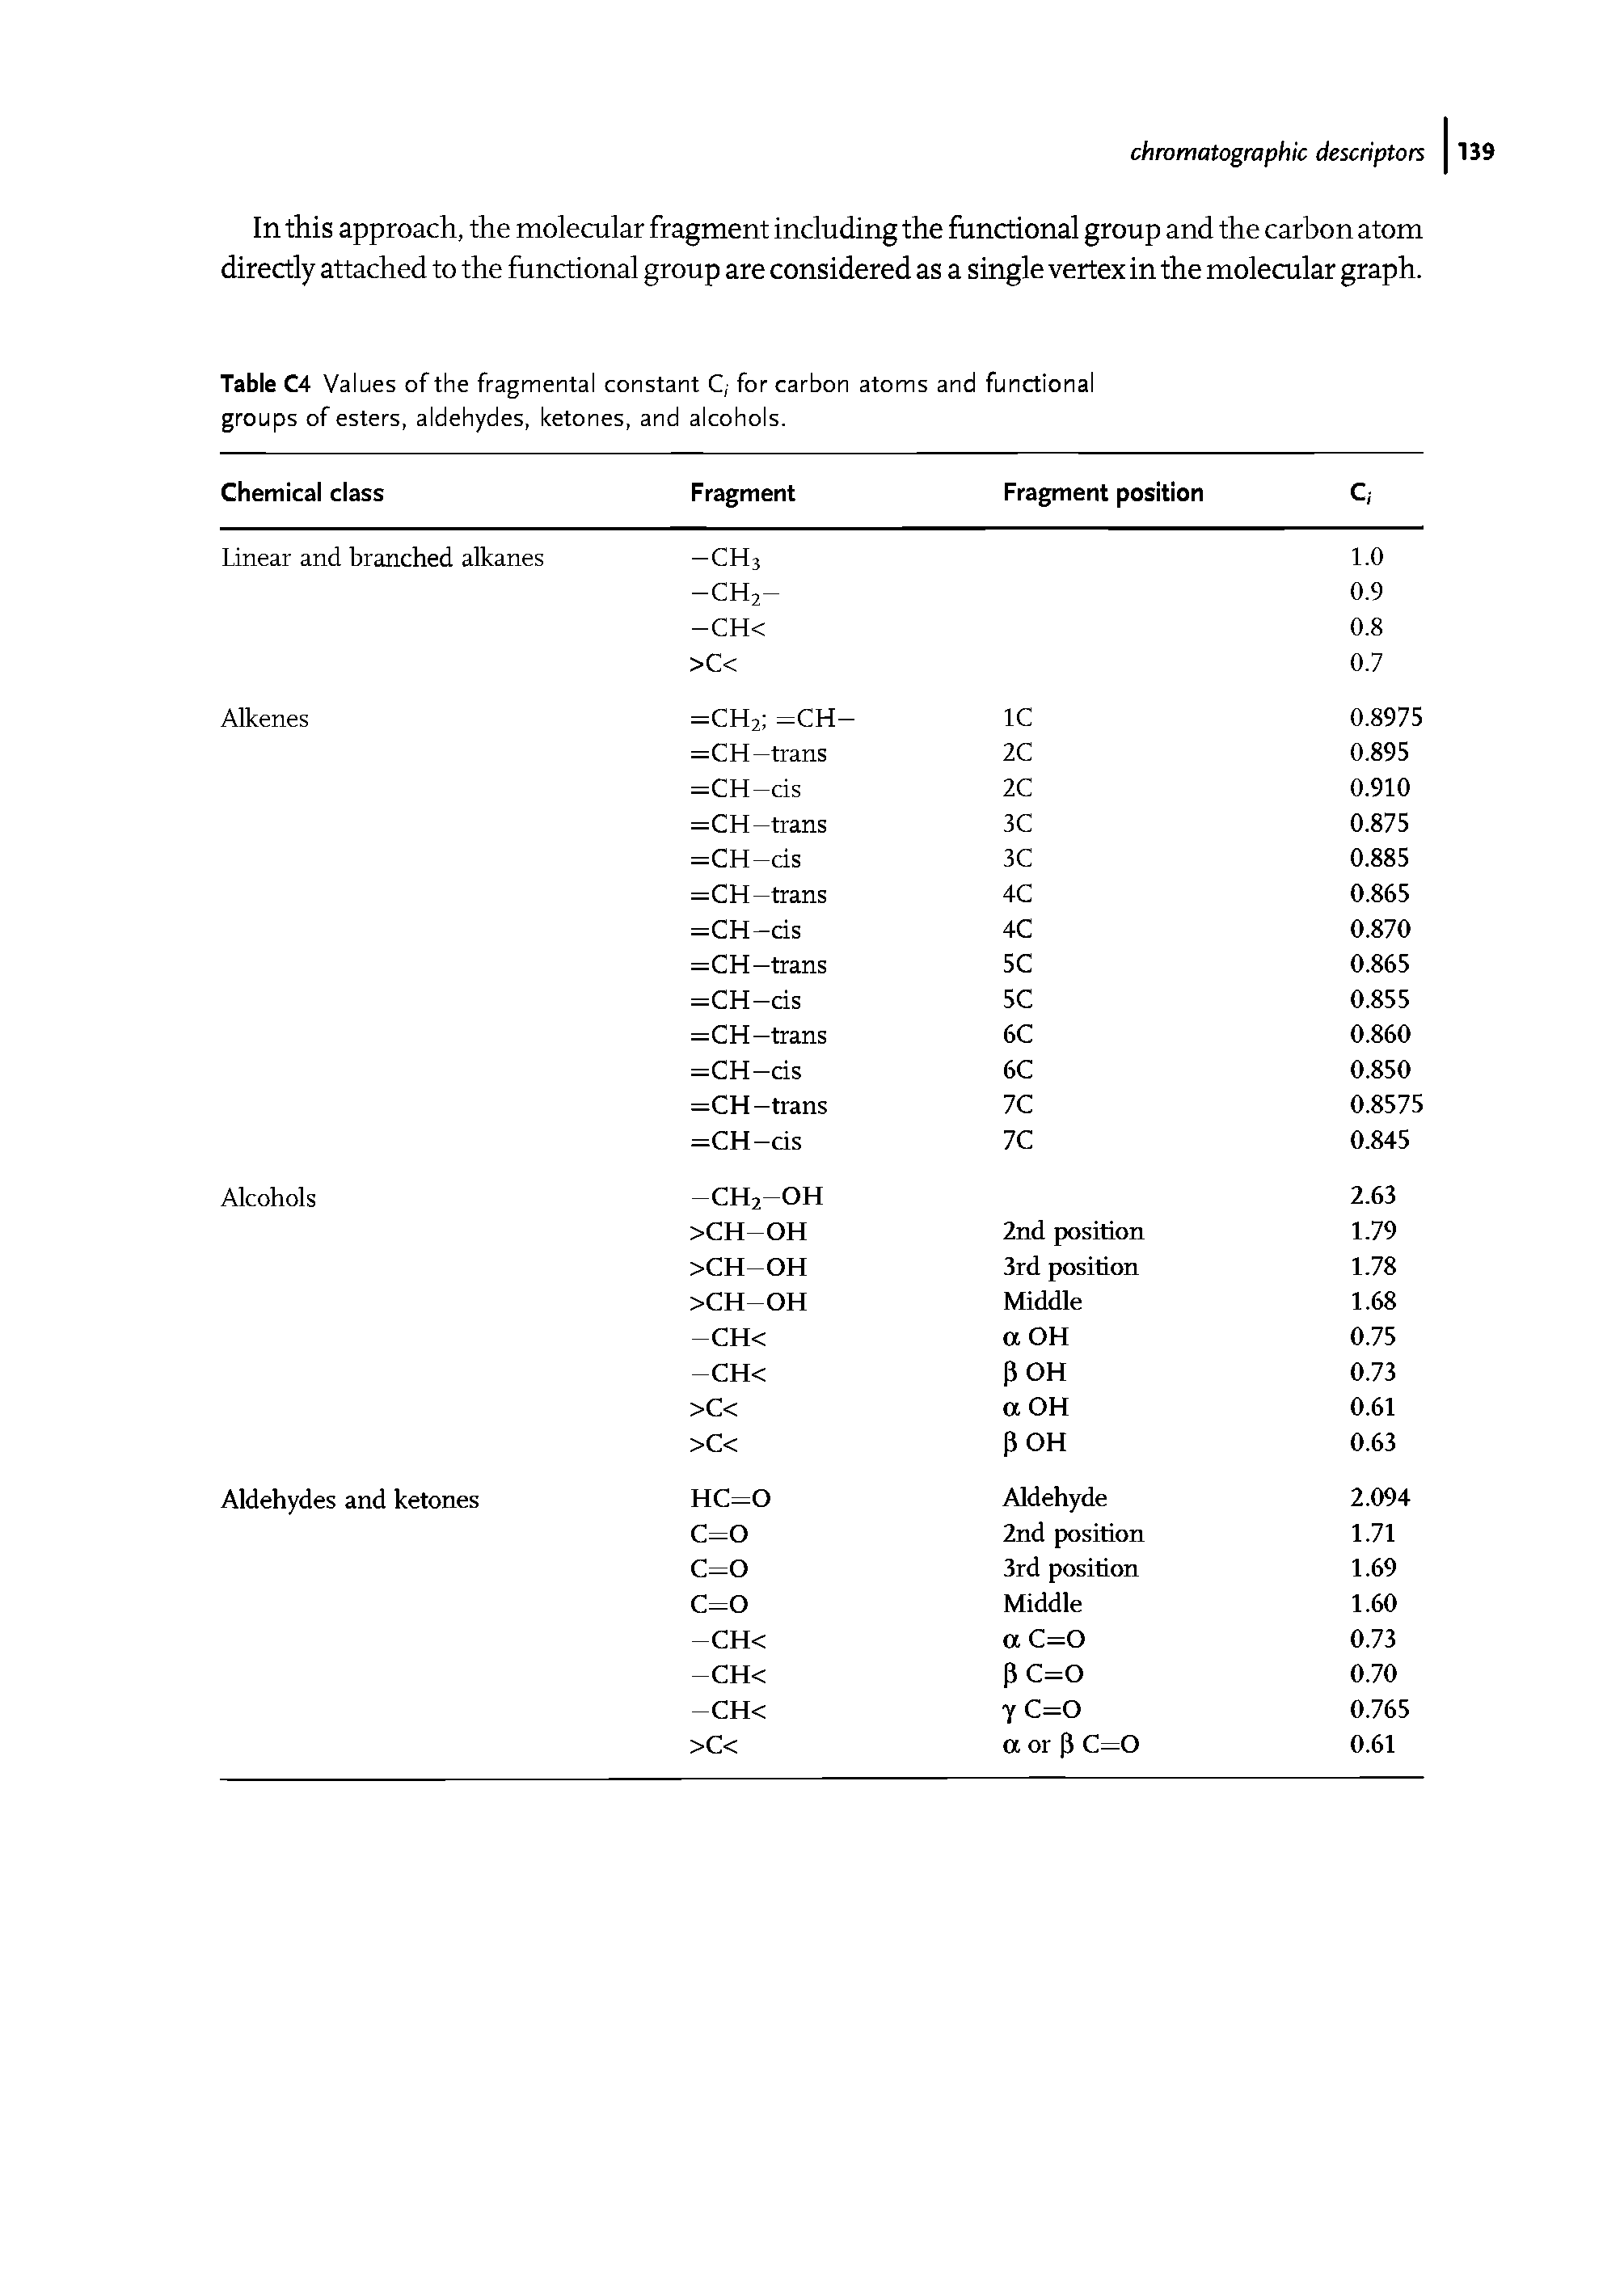 Table C4 Values of the fragmental constant C, for carbon atoms and functional groups of esters, aldehydes, ketones, and alcohols.